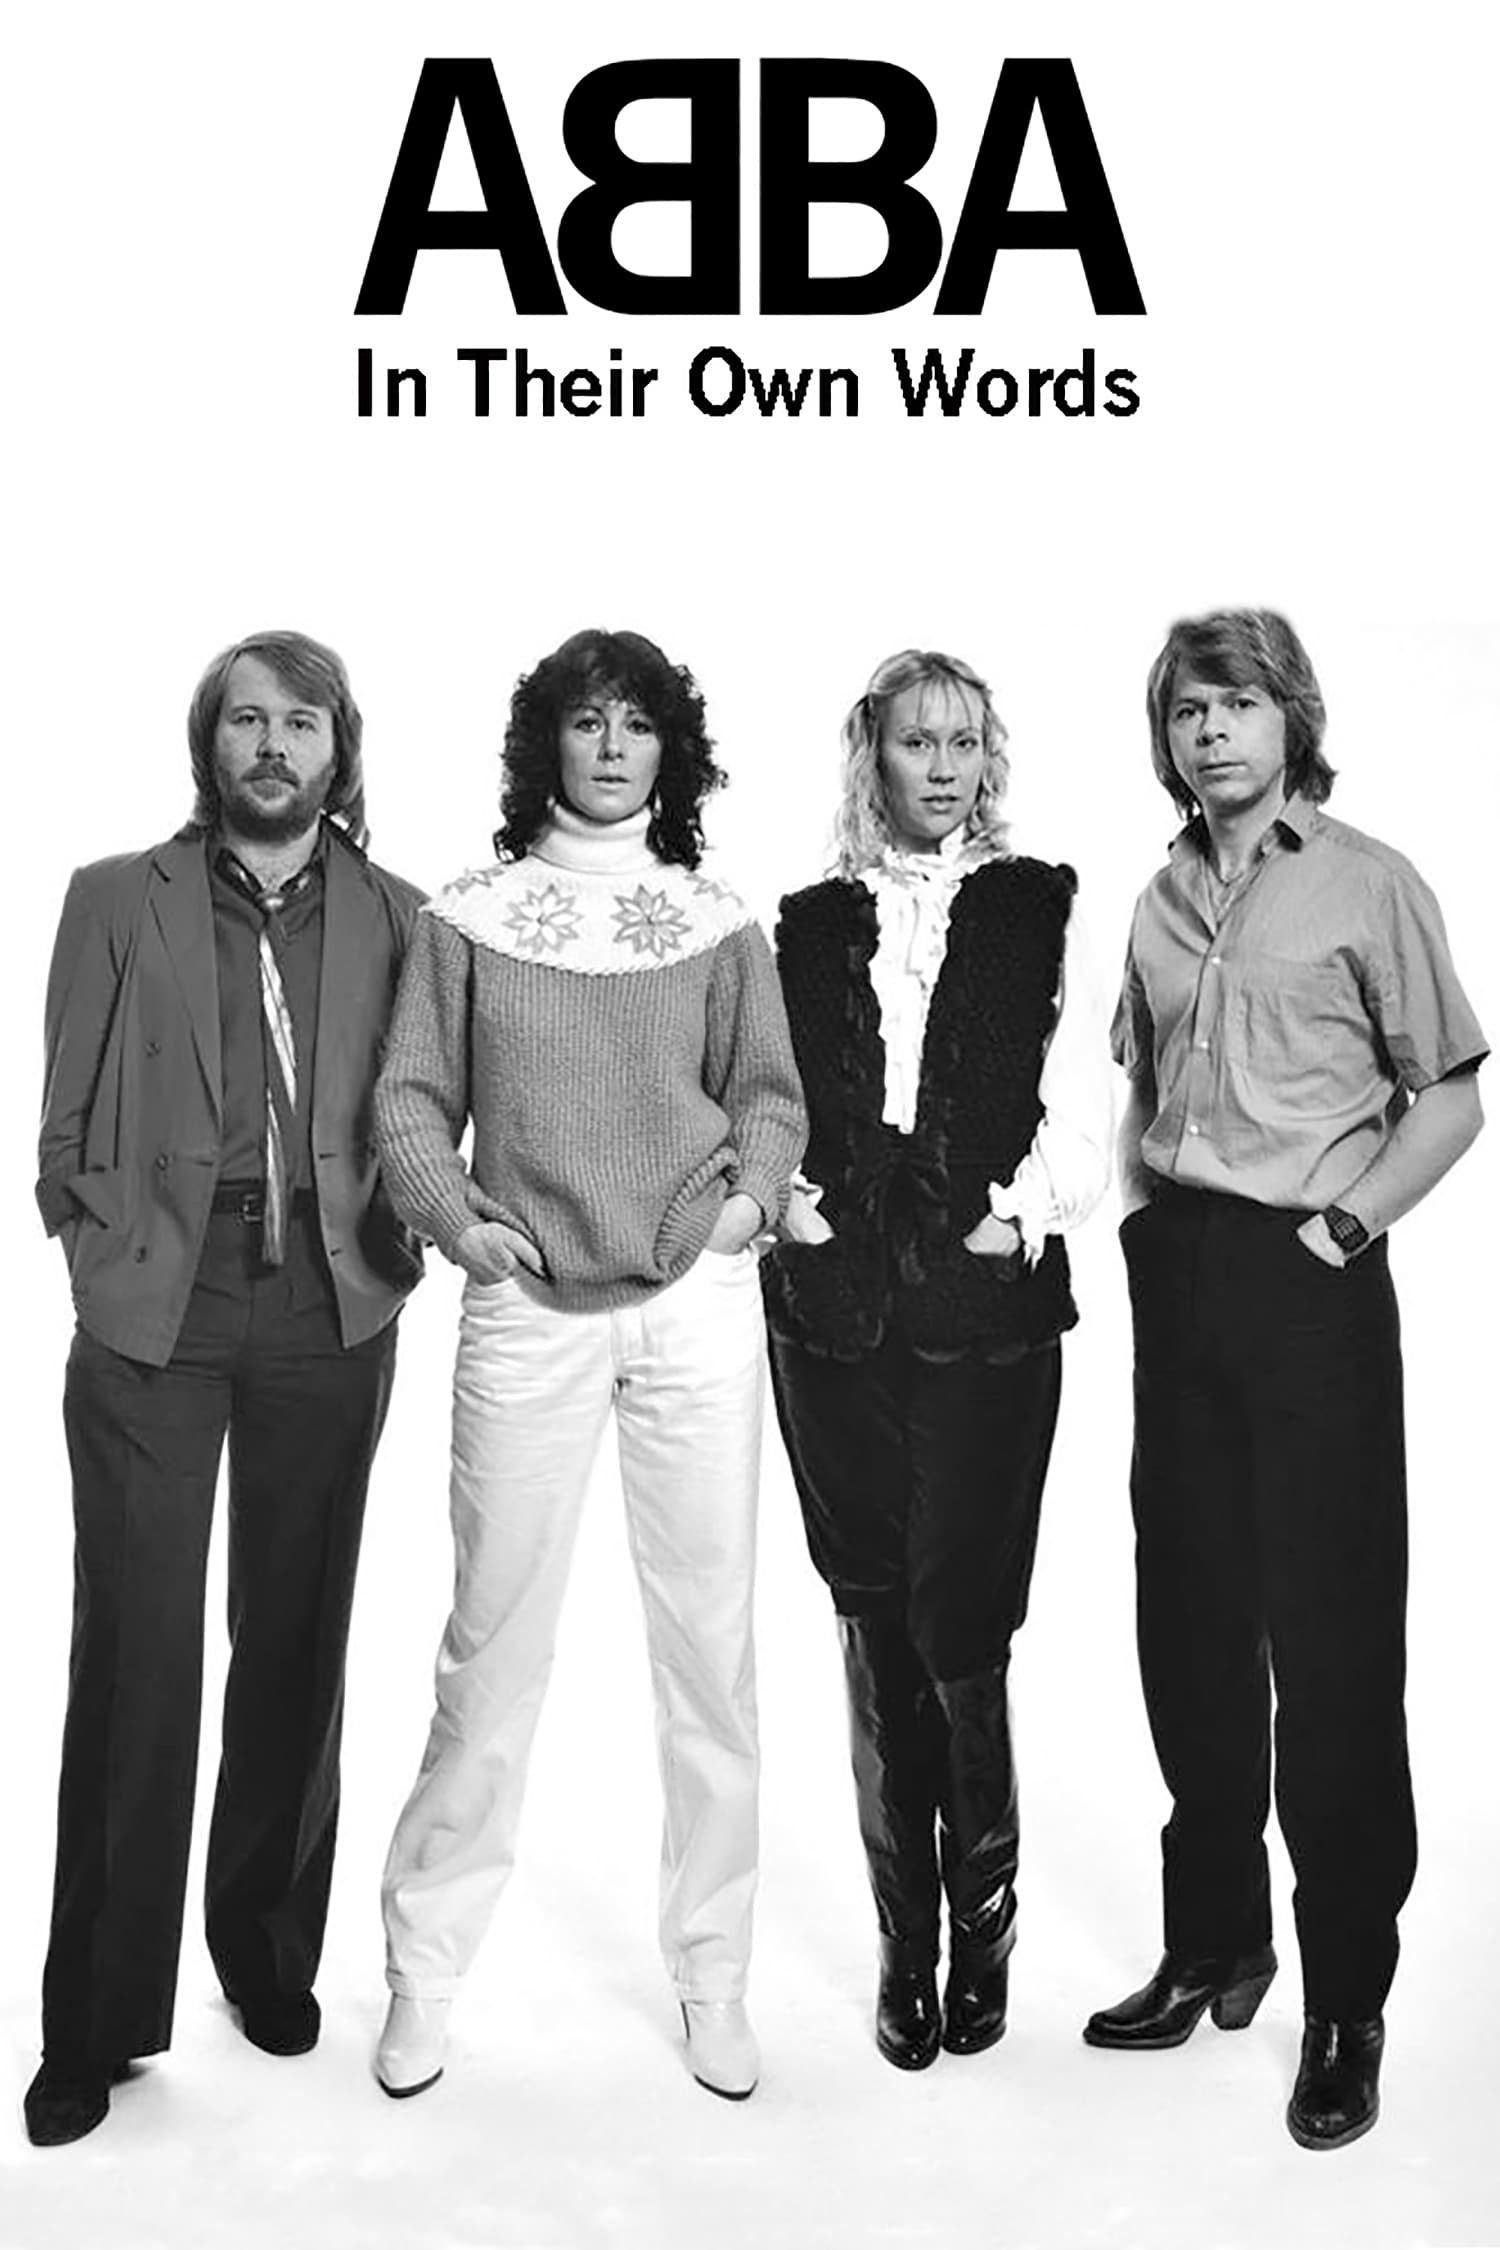 ABBA: In Their Own Words